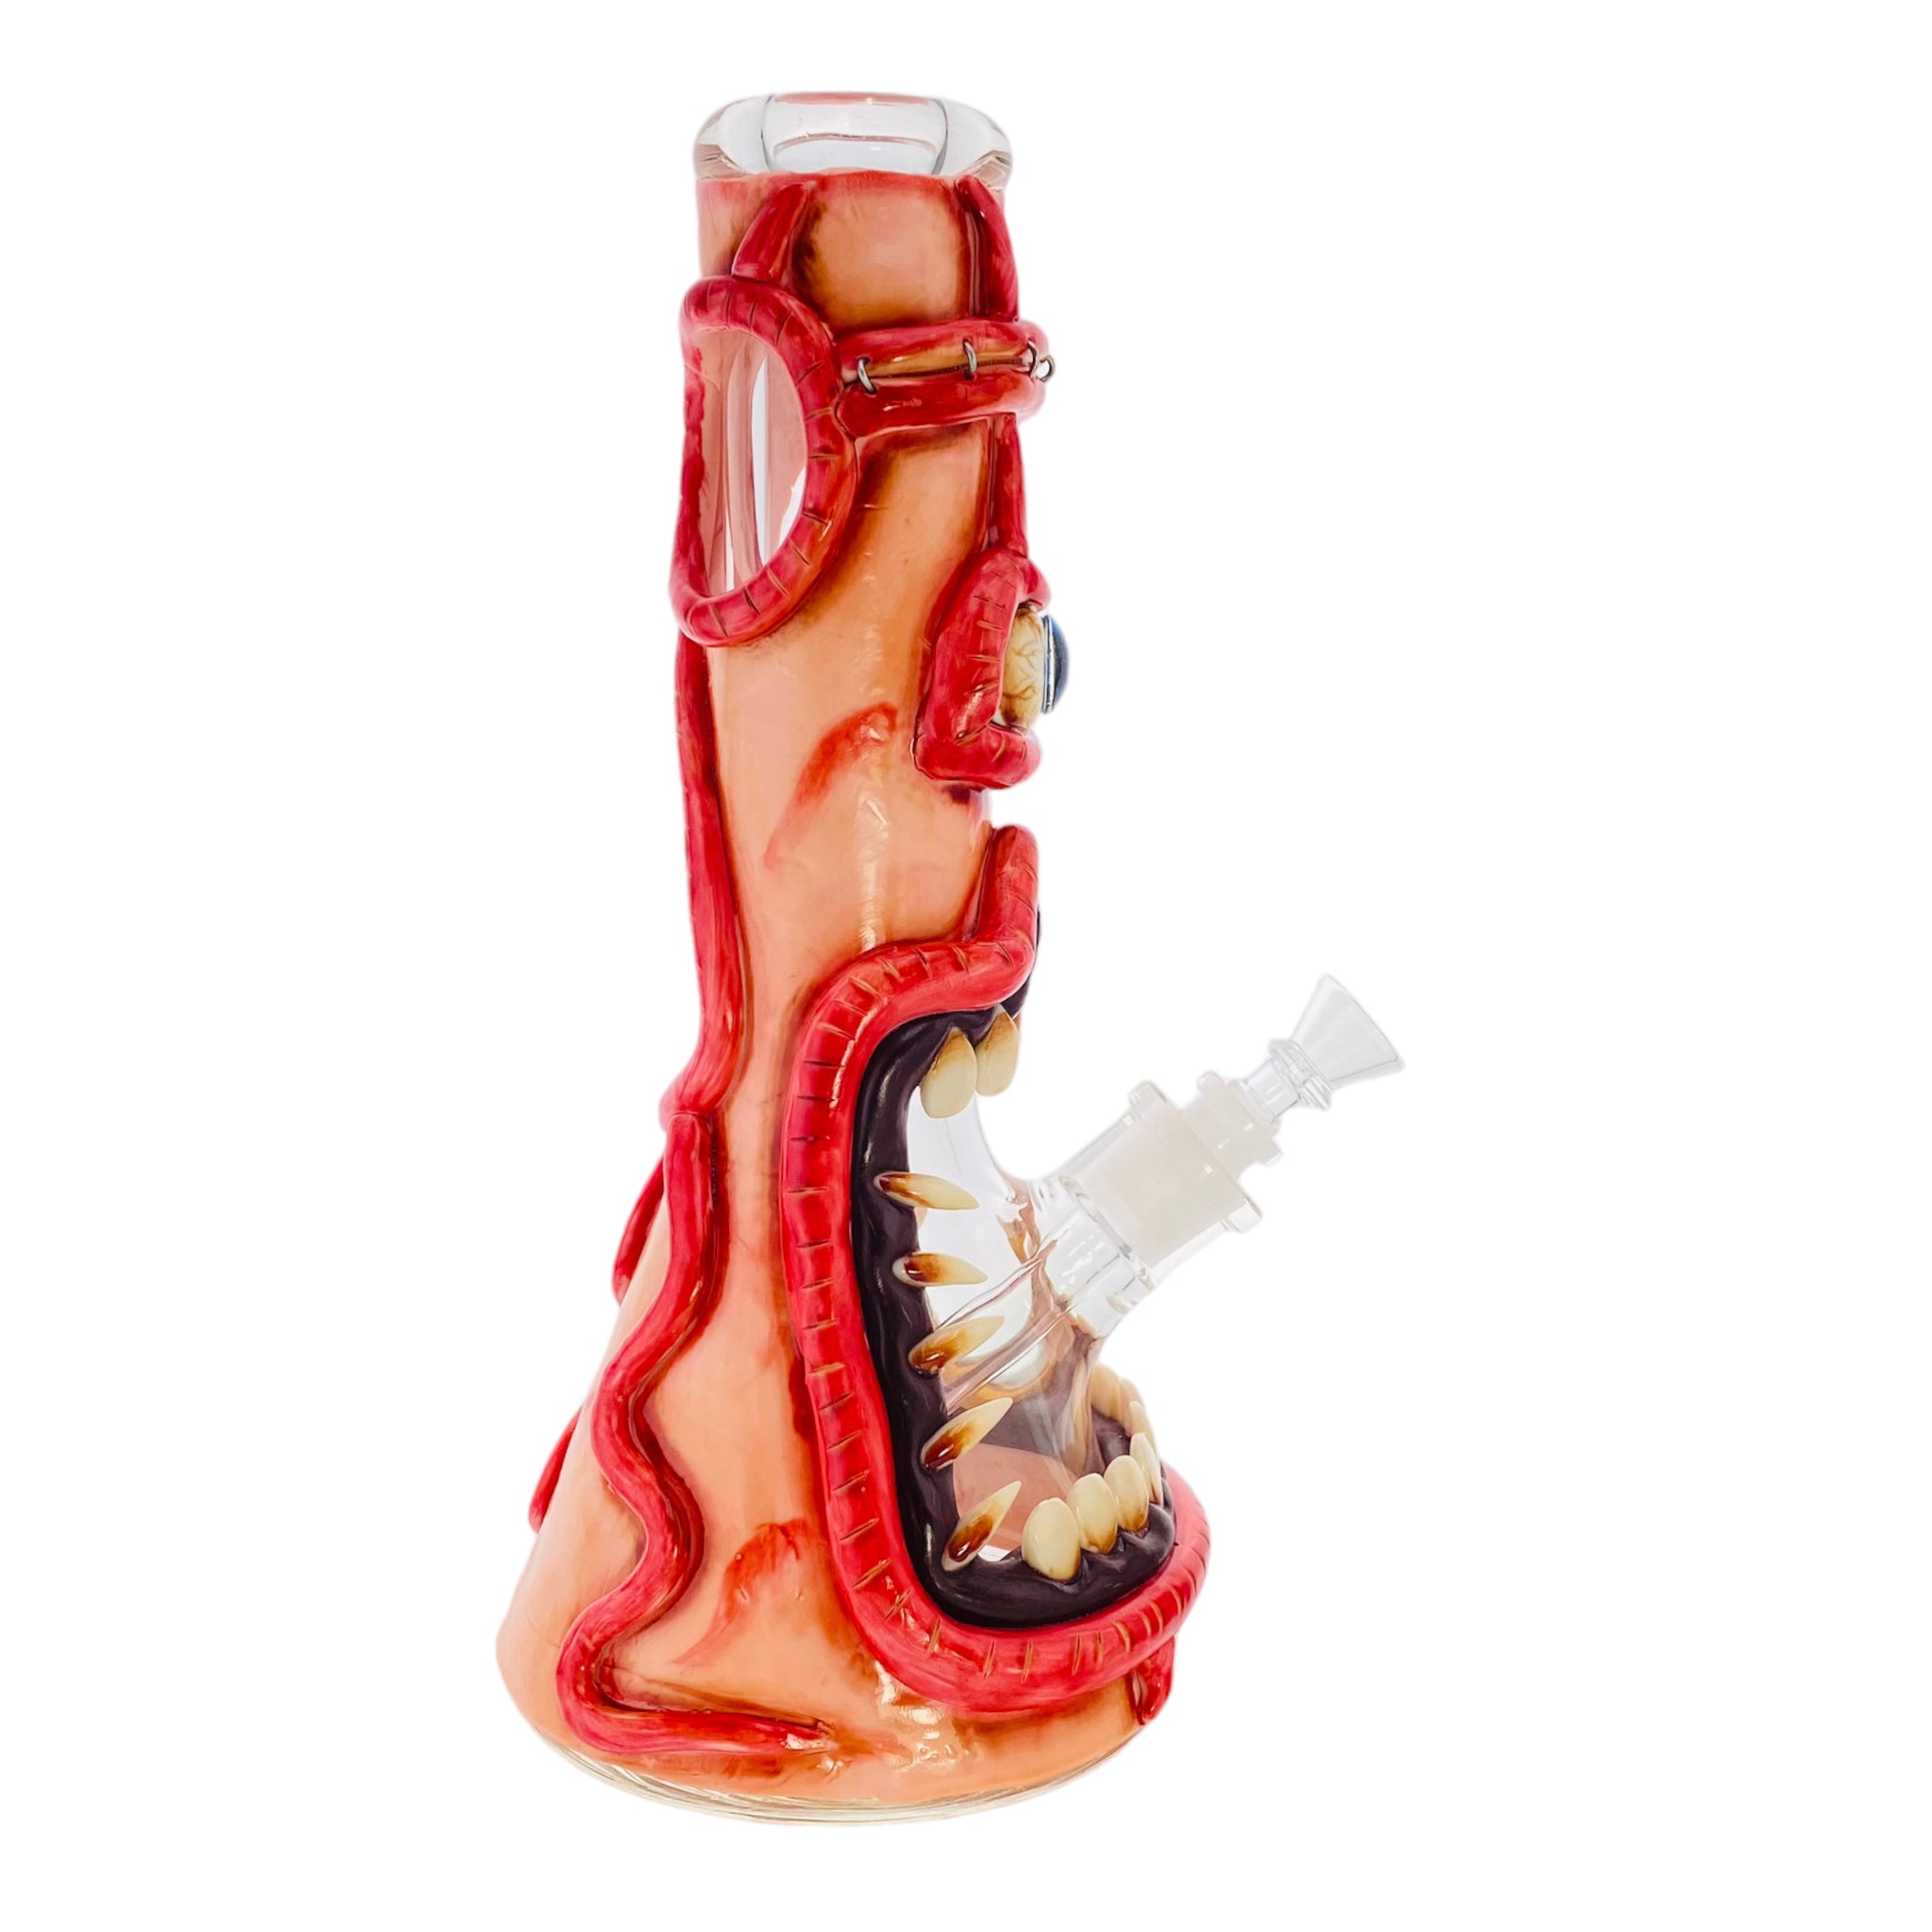 Monster Bongs - Stitched Together Screaming Monster Bong